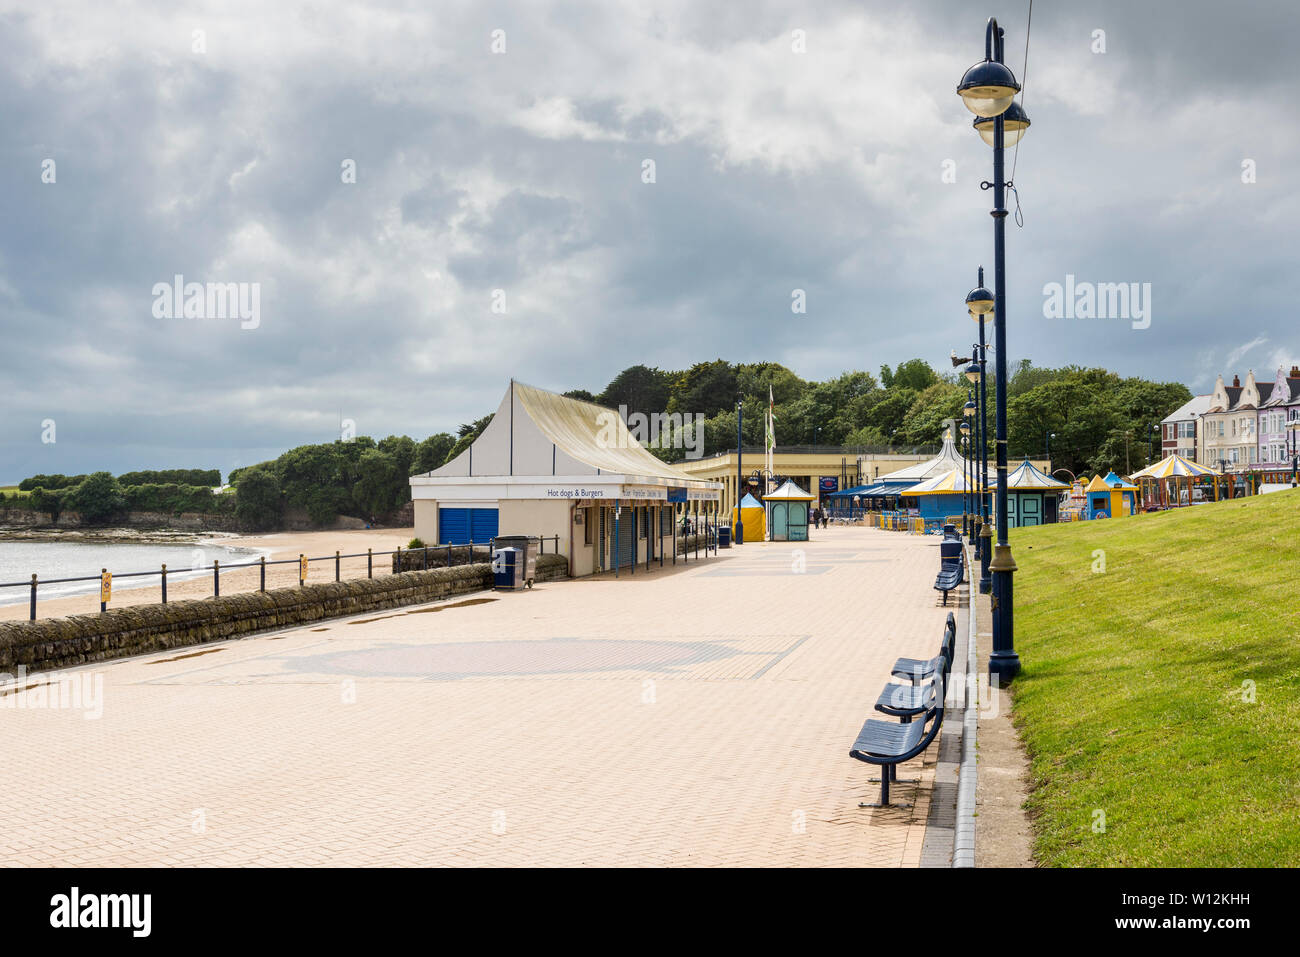 The promenade at Barry Island is bright but quiet during a sunny spell on a cloudy and showery early summer day. Stock Photo